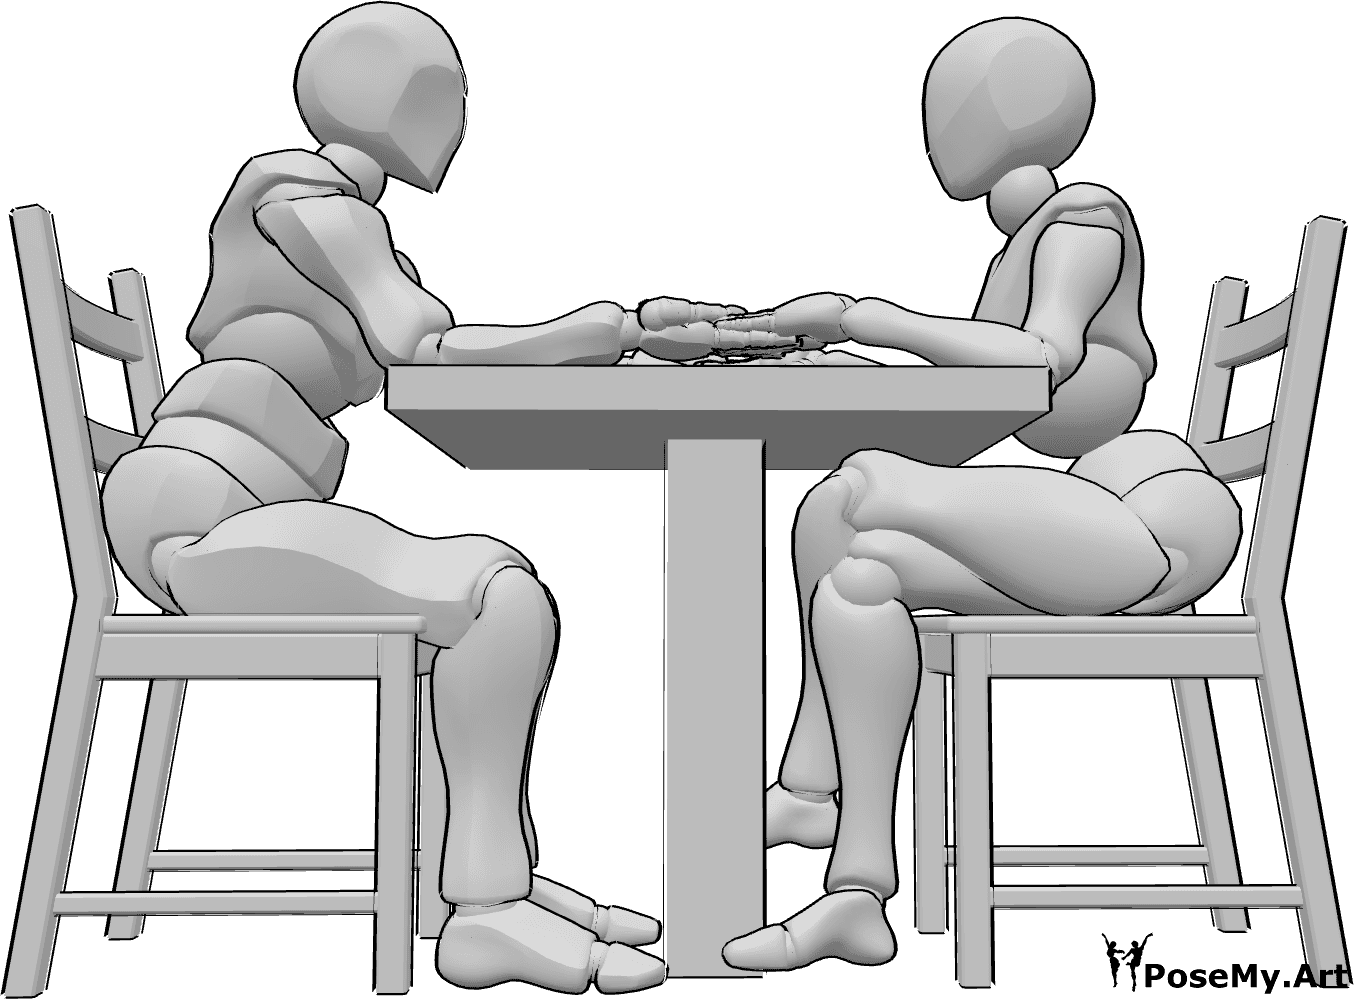 Pose Reference- Romantic sitting pose - Female and male are sitting at a table in front of each other and holding hands